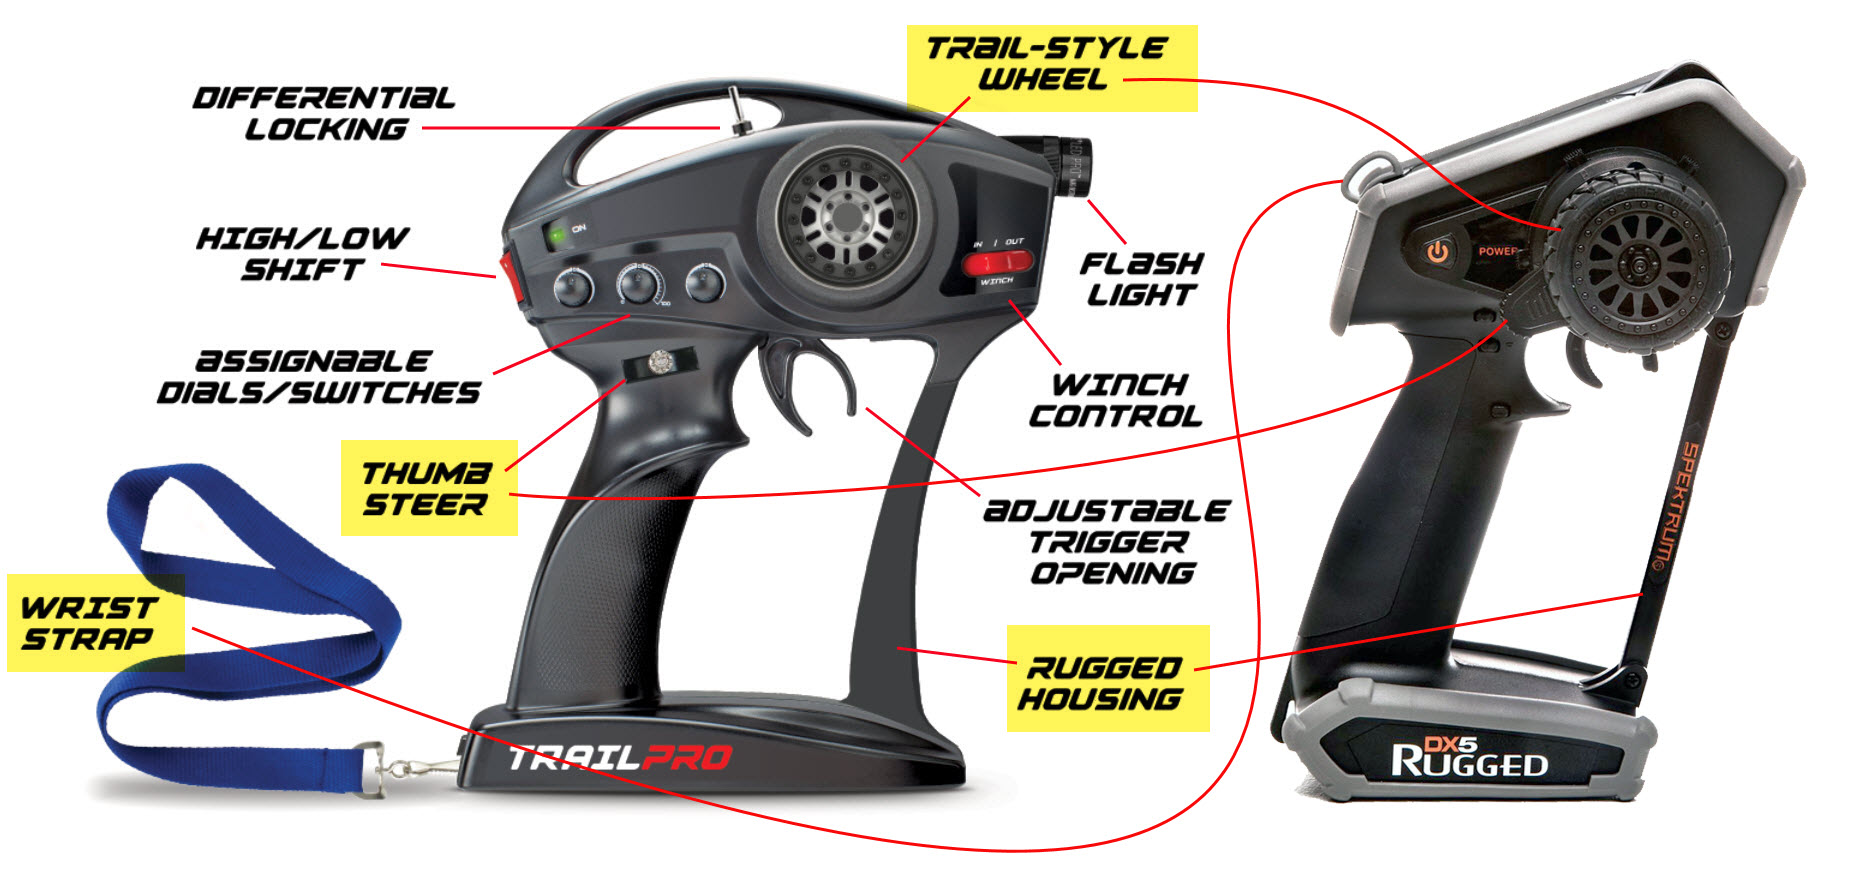 RC Car Action - RC Cars & Trucks | Where Have We Seen the “Trail Radio” Idea Before?